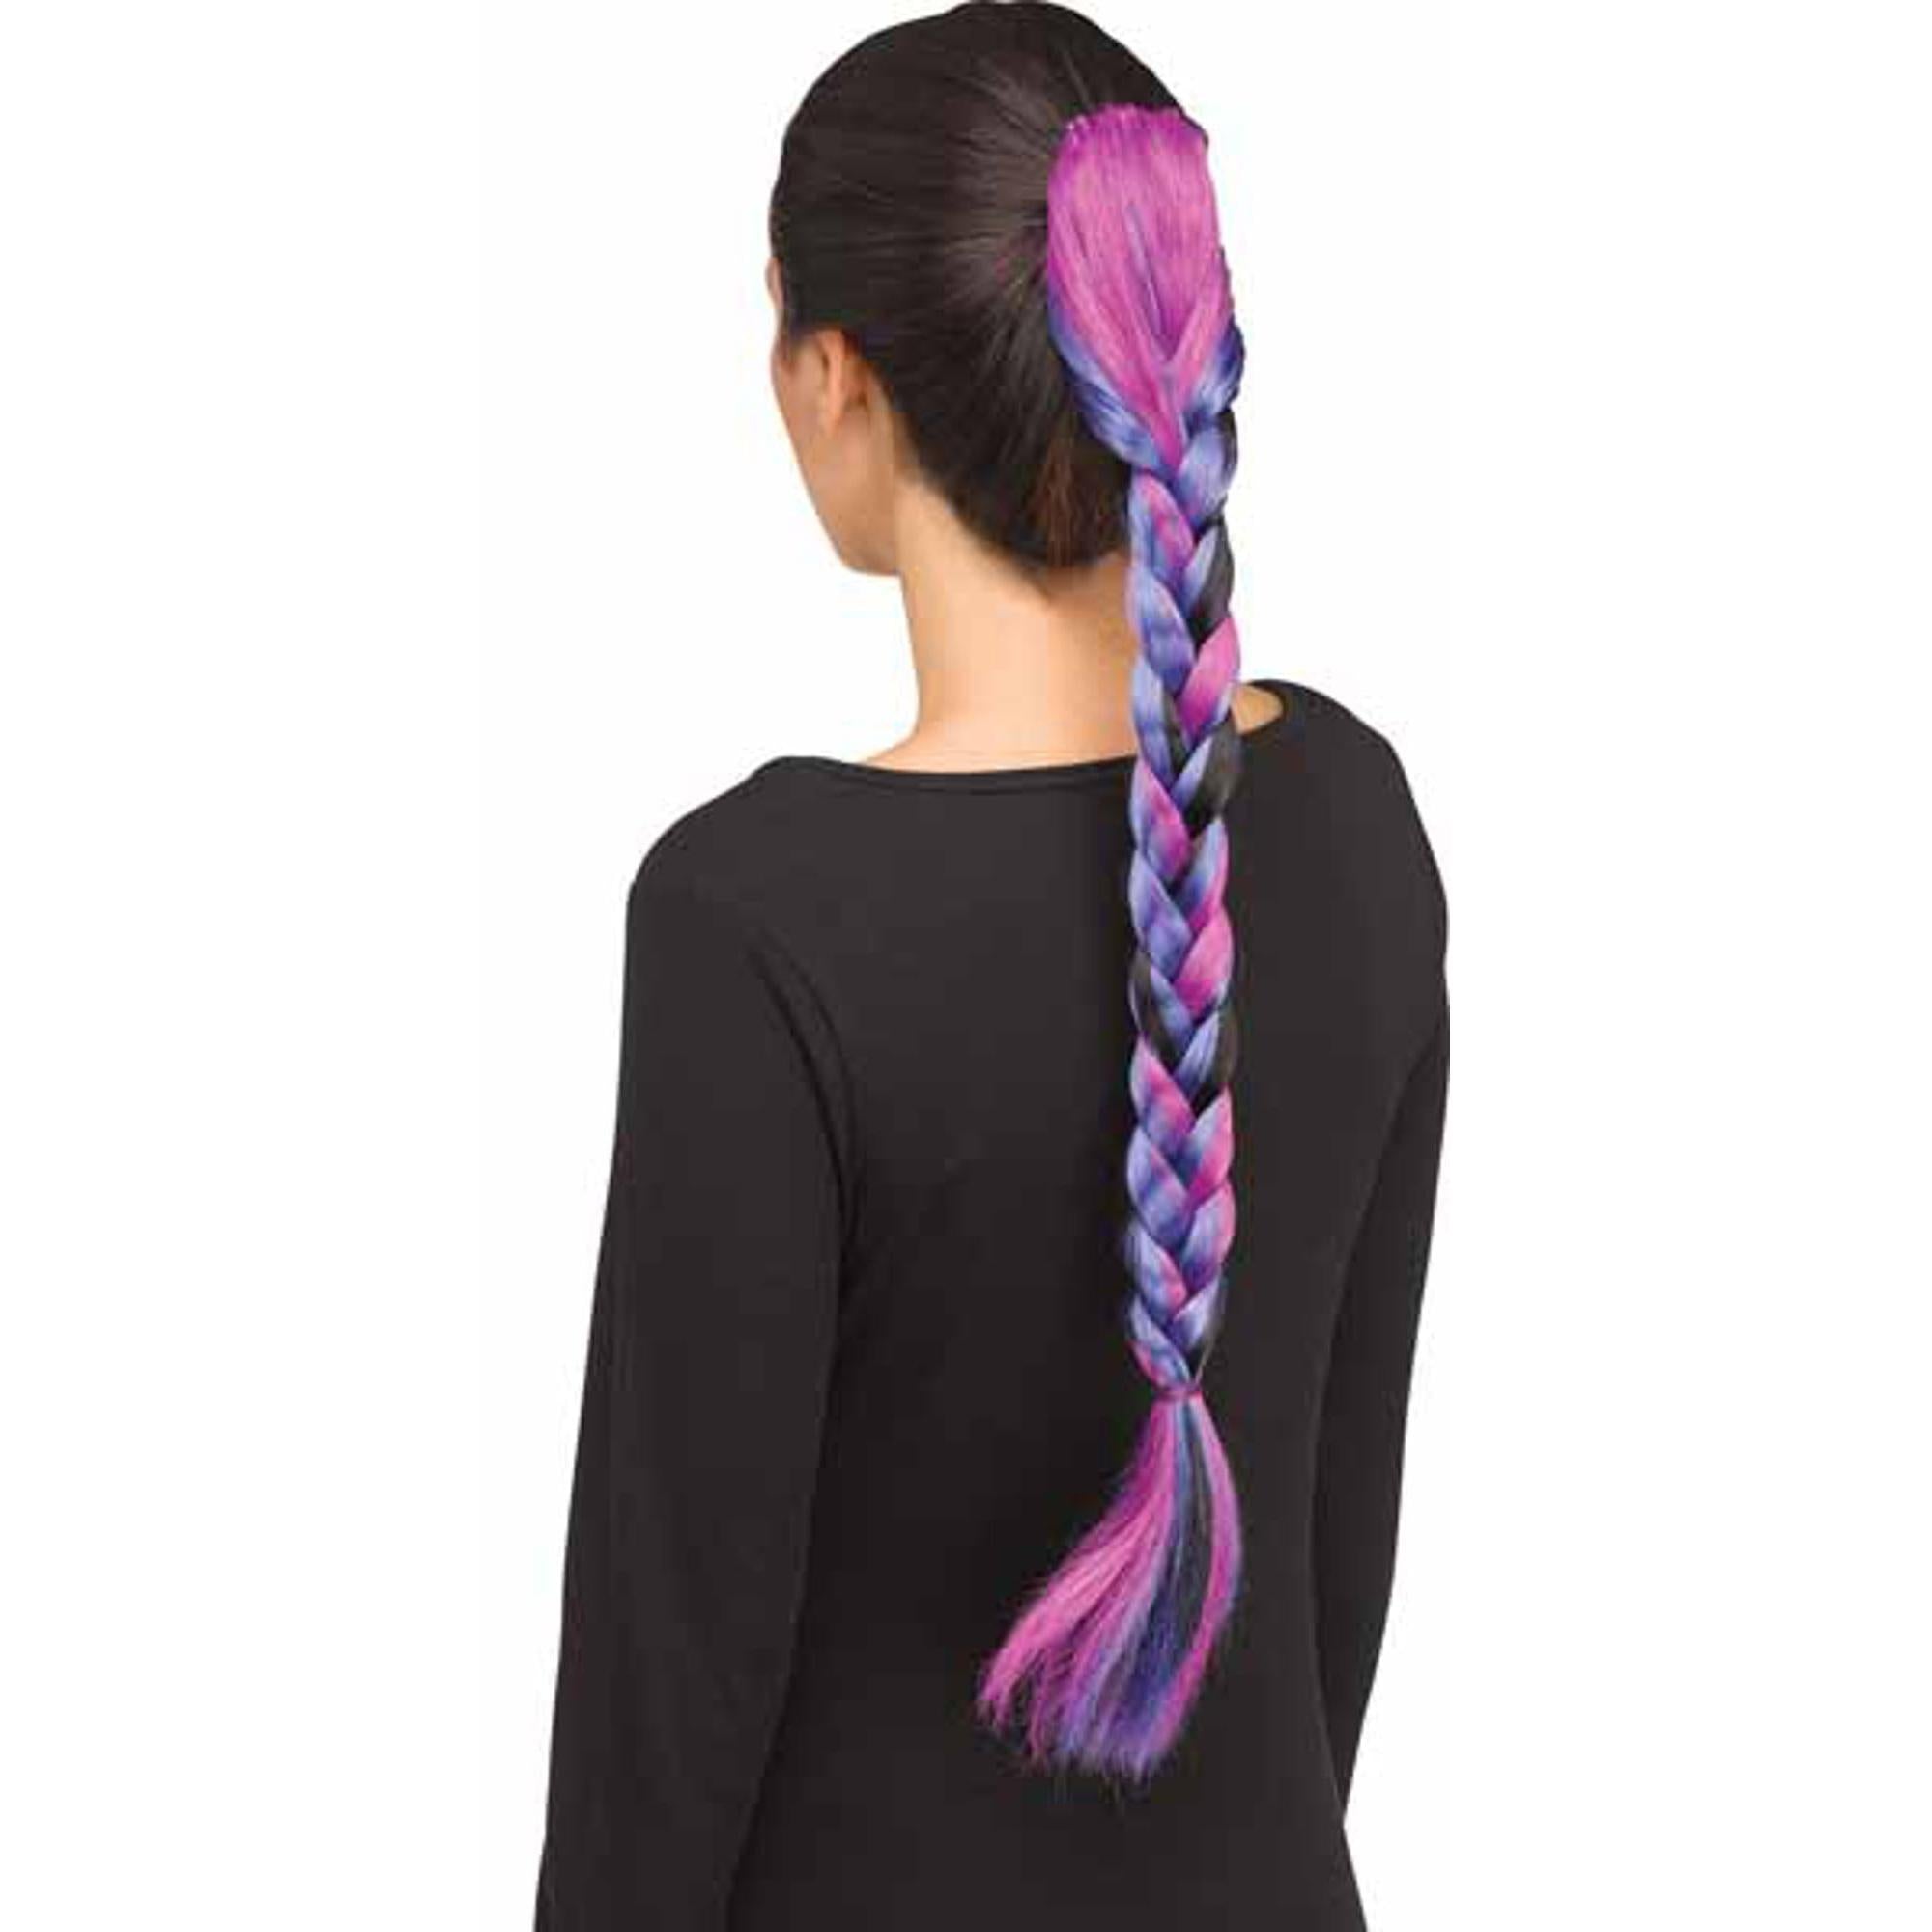 Image of Unicorn pigtails hairstyle